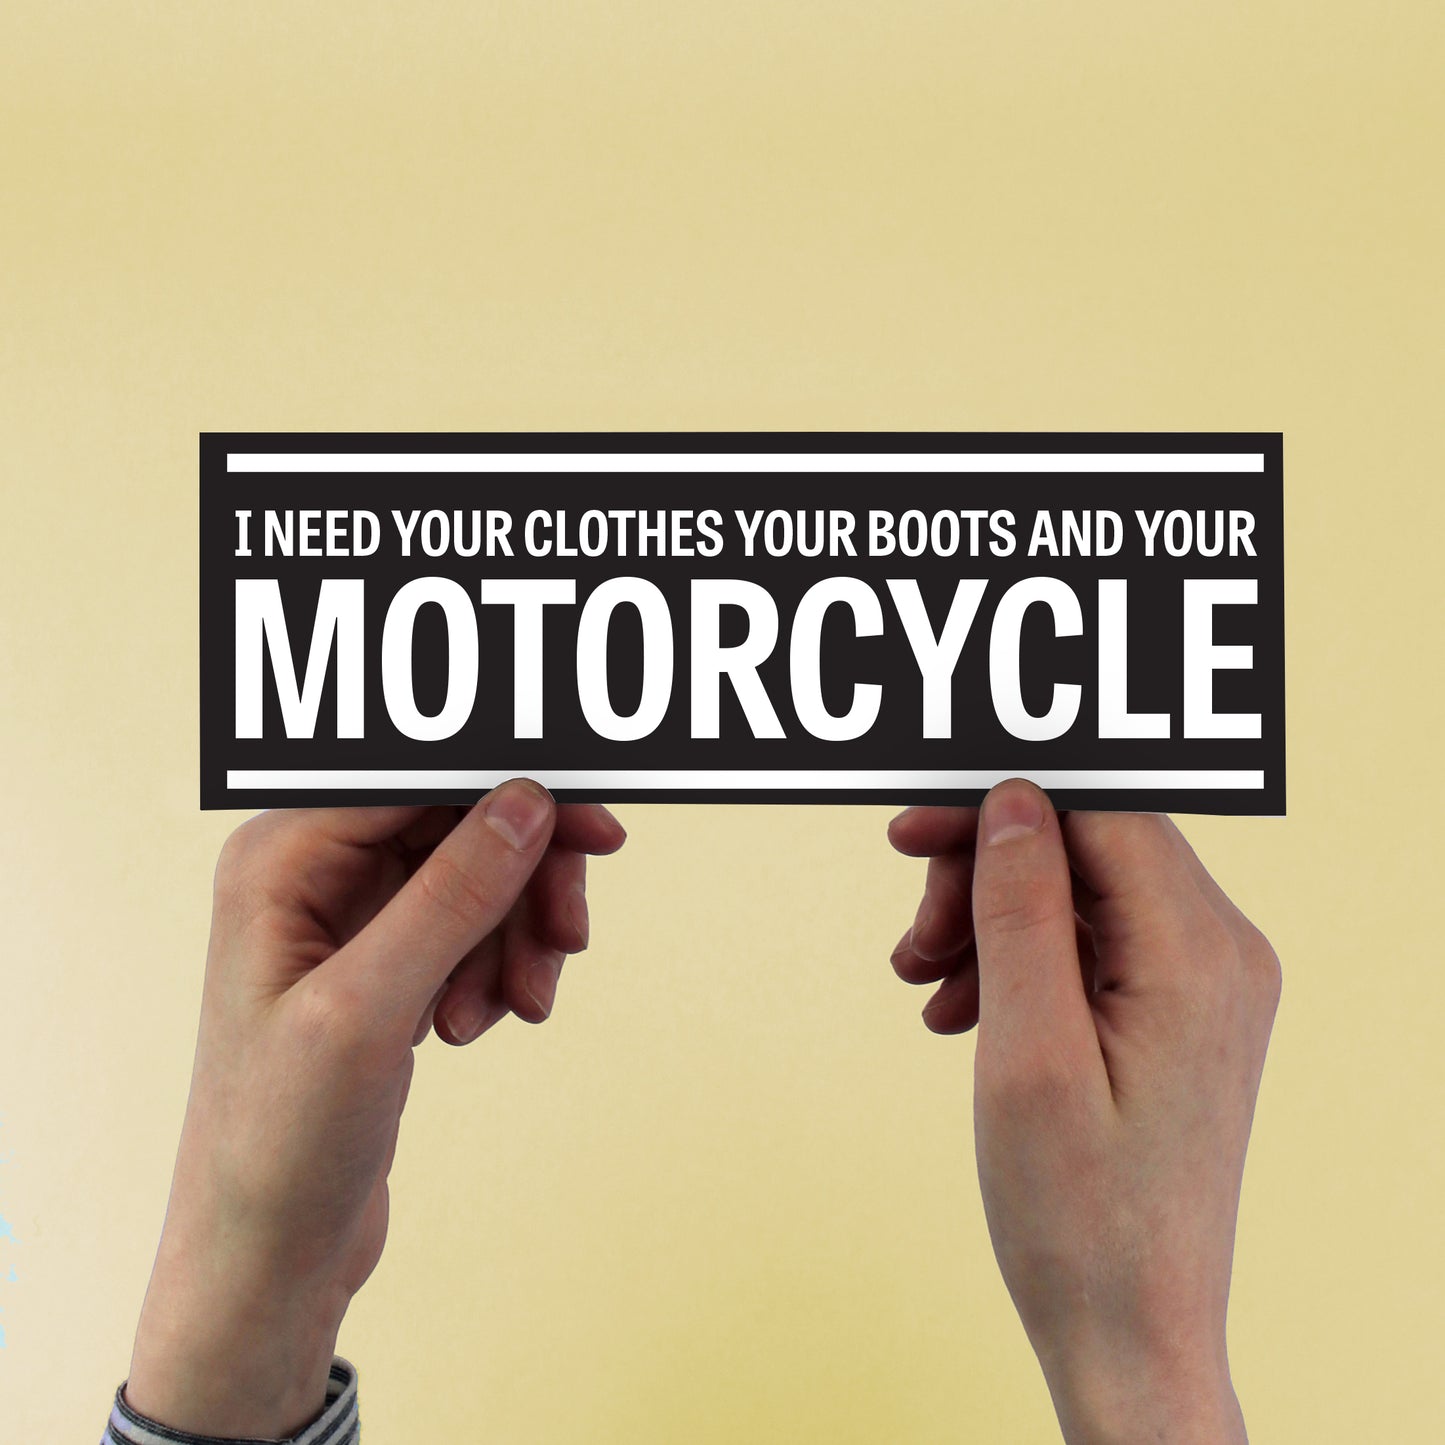 Terminator Quote Bumper Sticker "I need your clothes yours boots and your motorcycle"